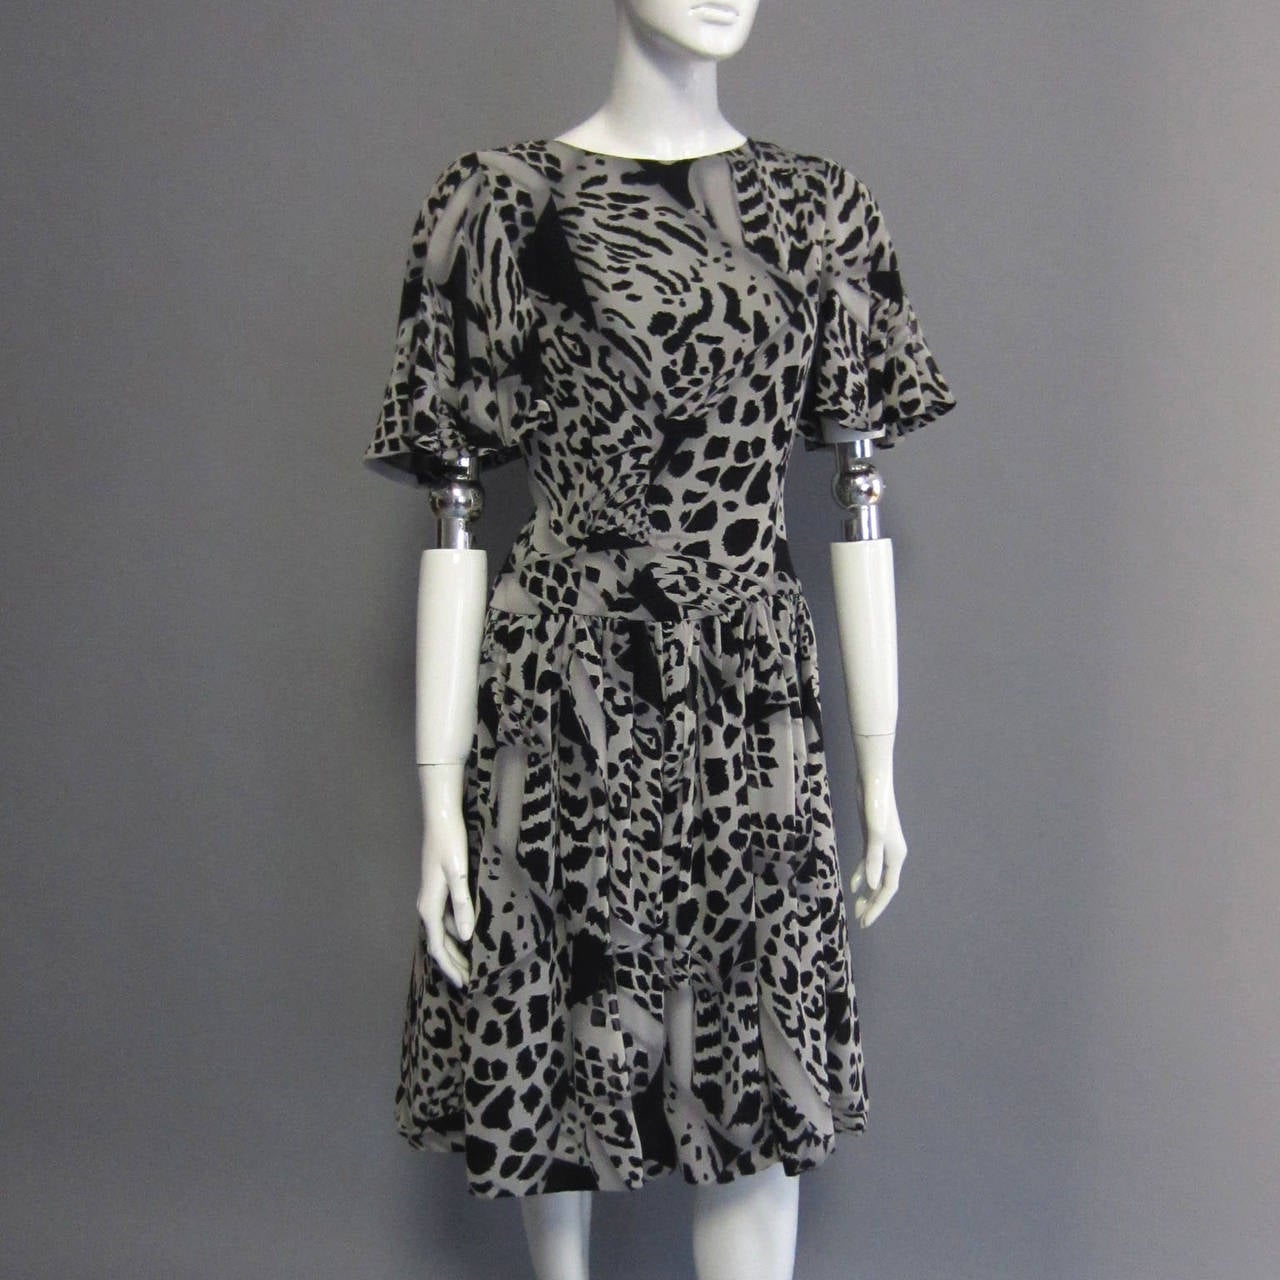 PAULINE TRIGERE Graphic Print Dress with Flutter Sleeve Detail In Excellent Condition For Sale In New York, NY